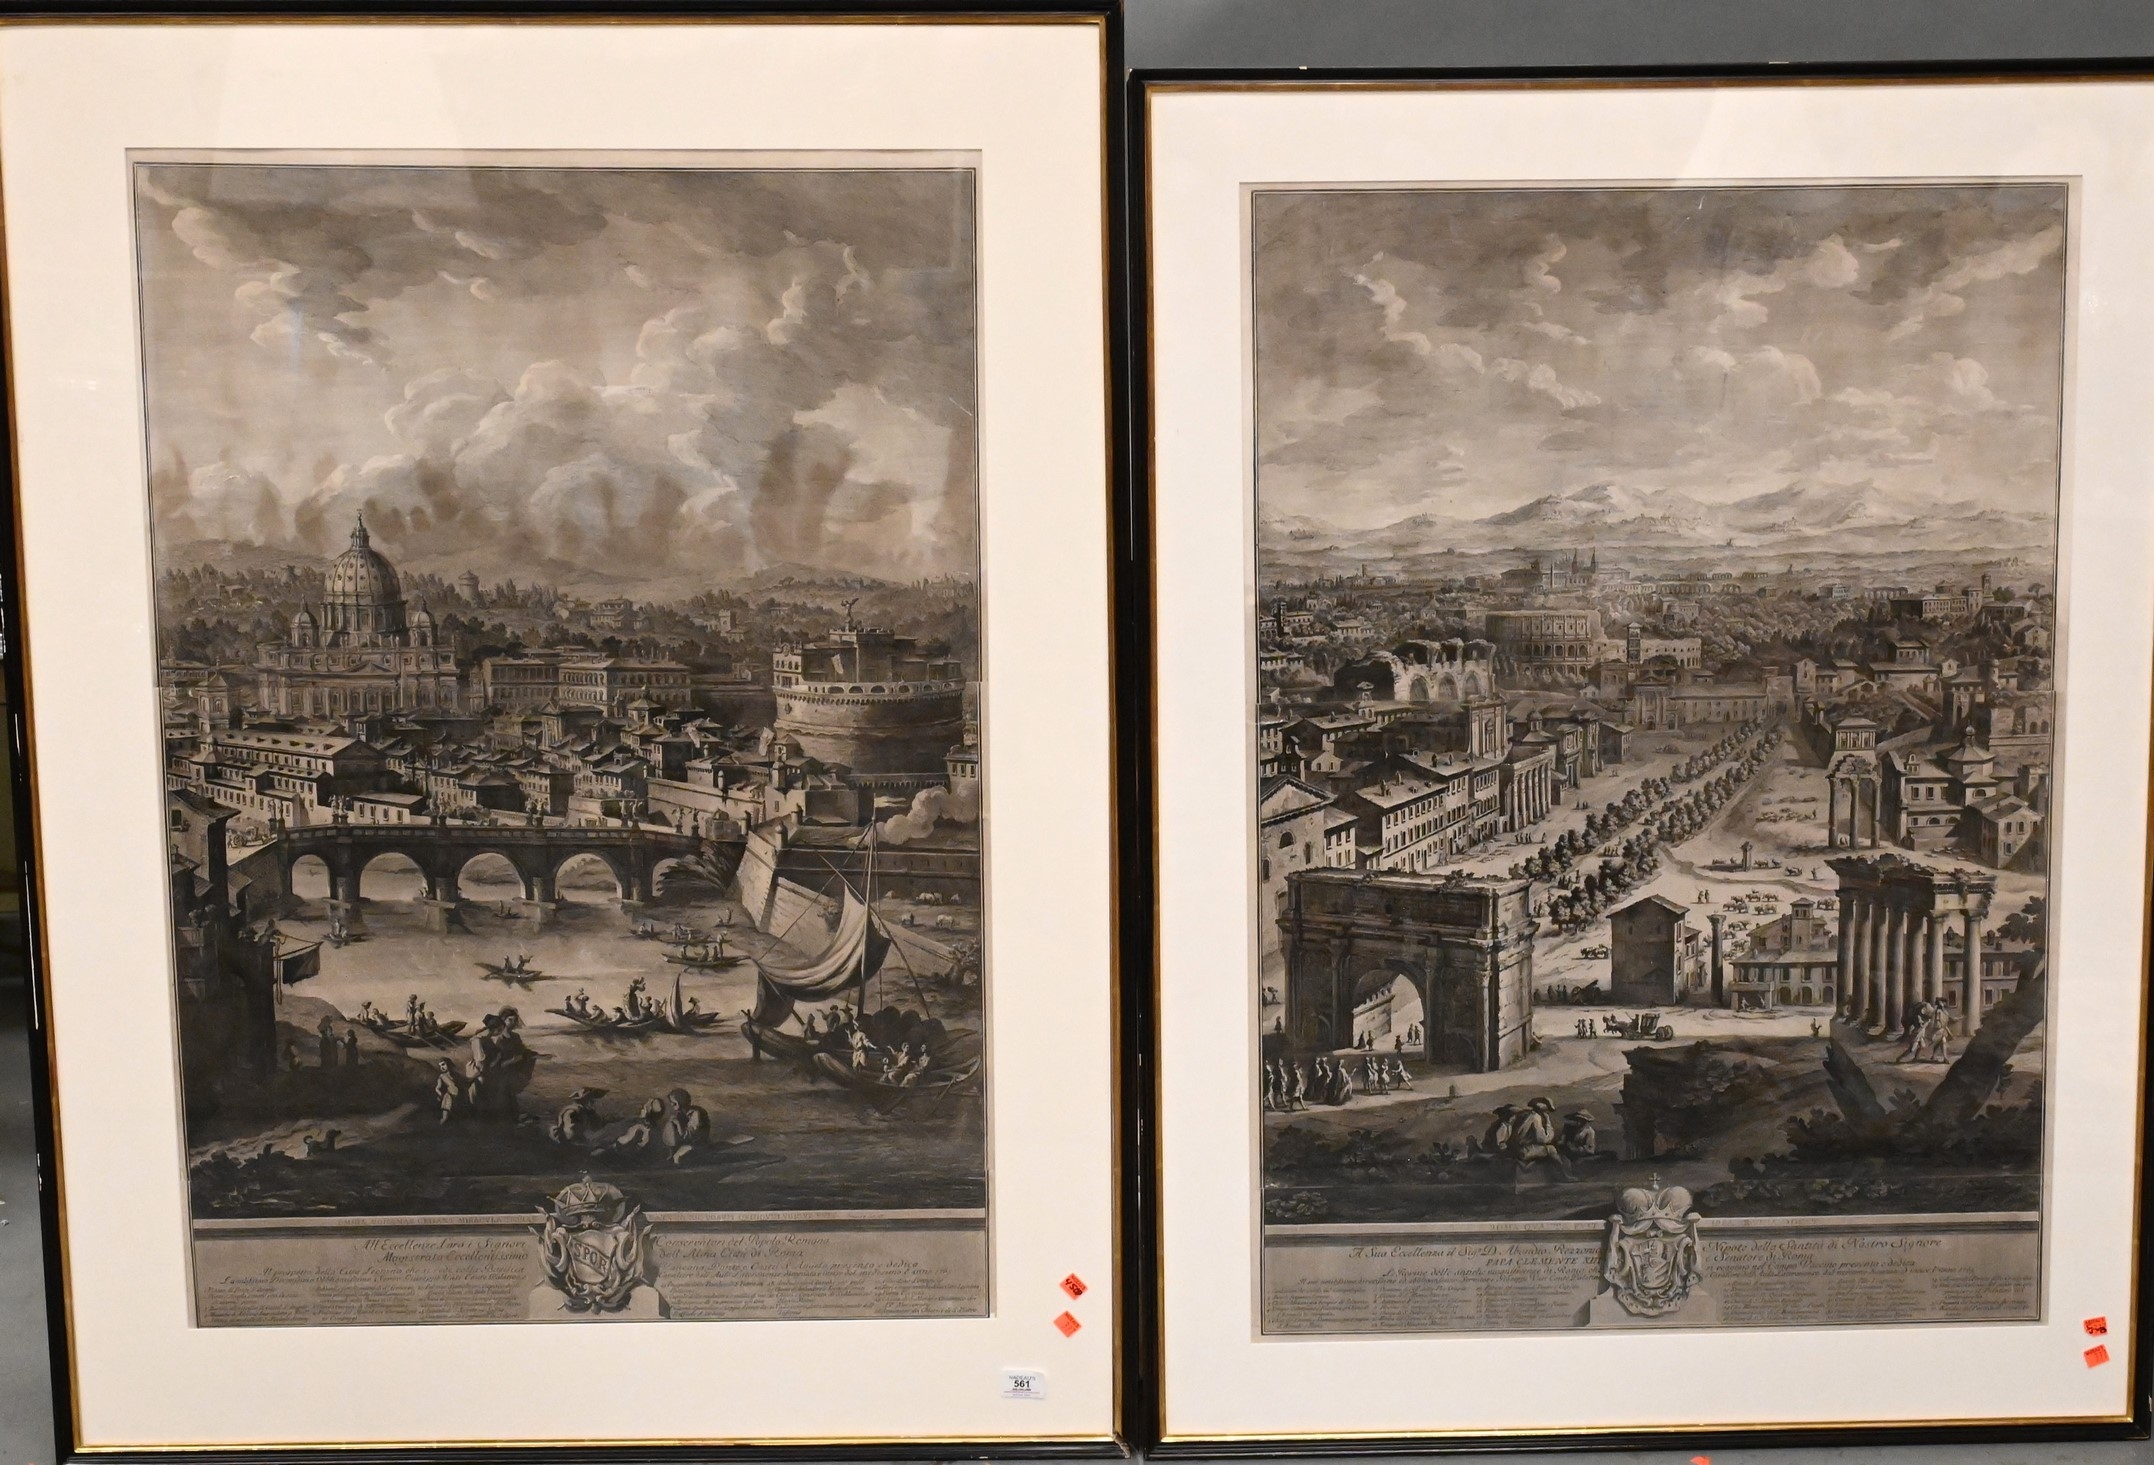 “Grand View of Rome: St. Peter’s and Castel S. Angelo” printed on three sheets, circa 1765 - Giuseppe Vasi